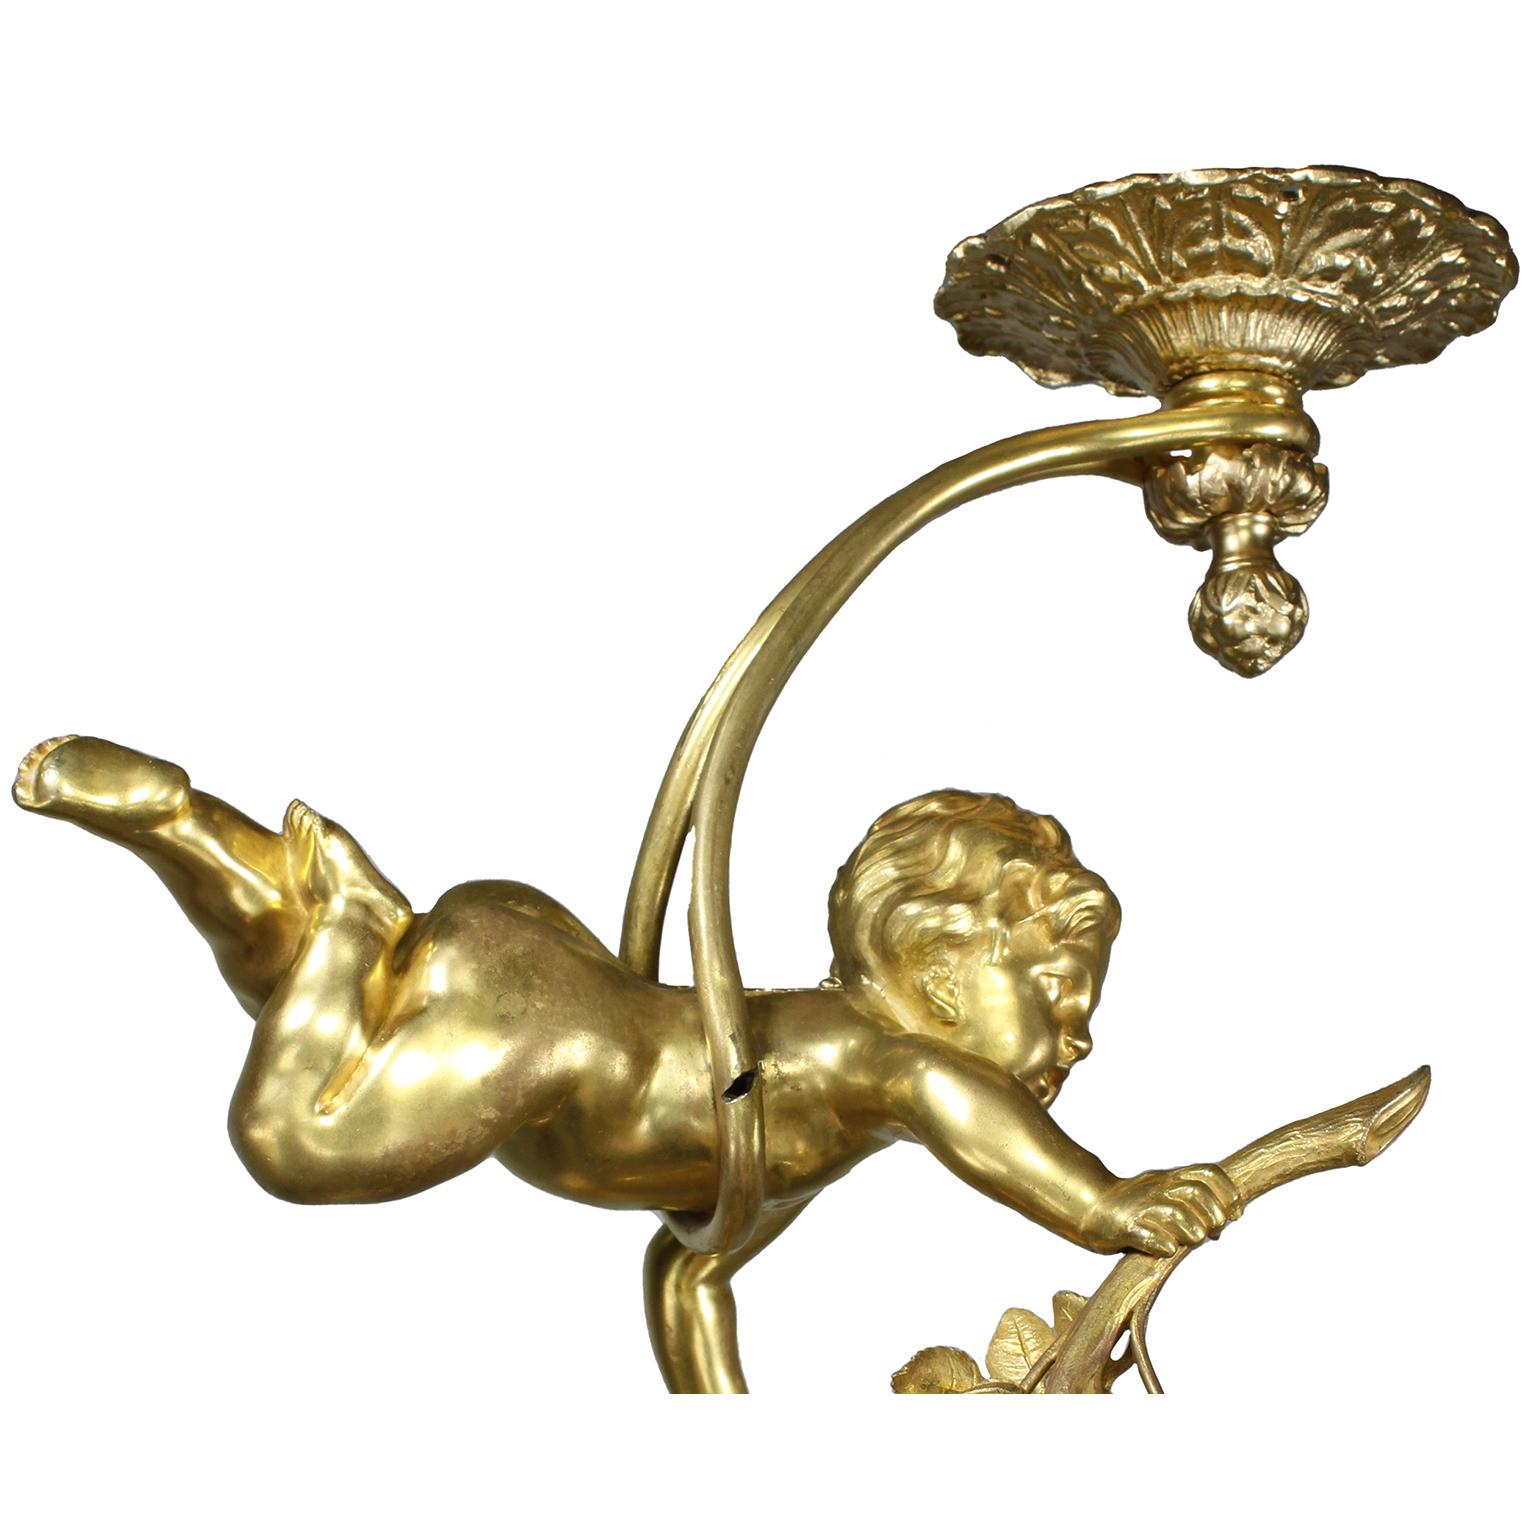 Whimsical French 19th/20th Century Gilt-Bronze Belle Époque Putto Chandelier For Sale 2